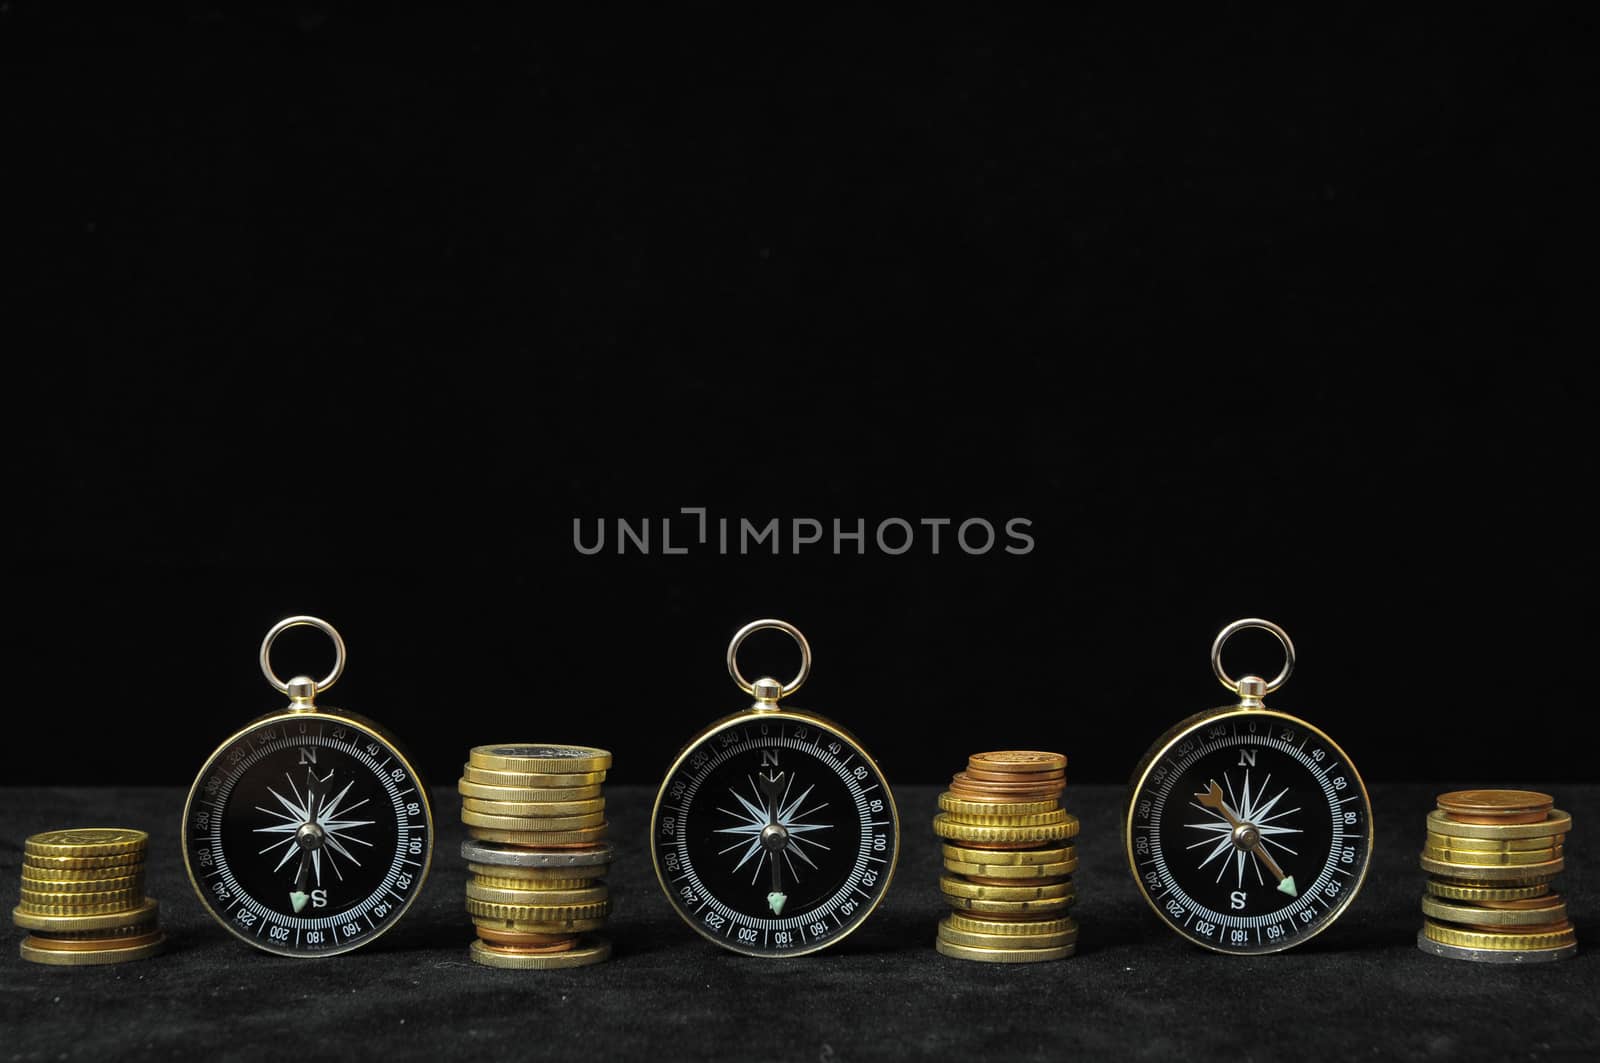 Orientation in  Business Compass and Money on a Black Background